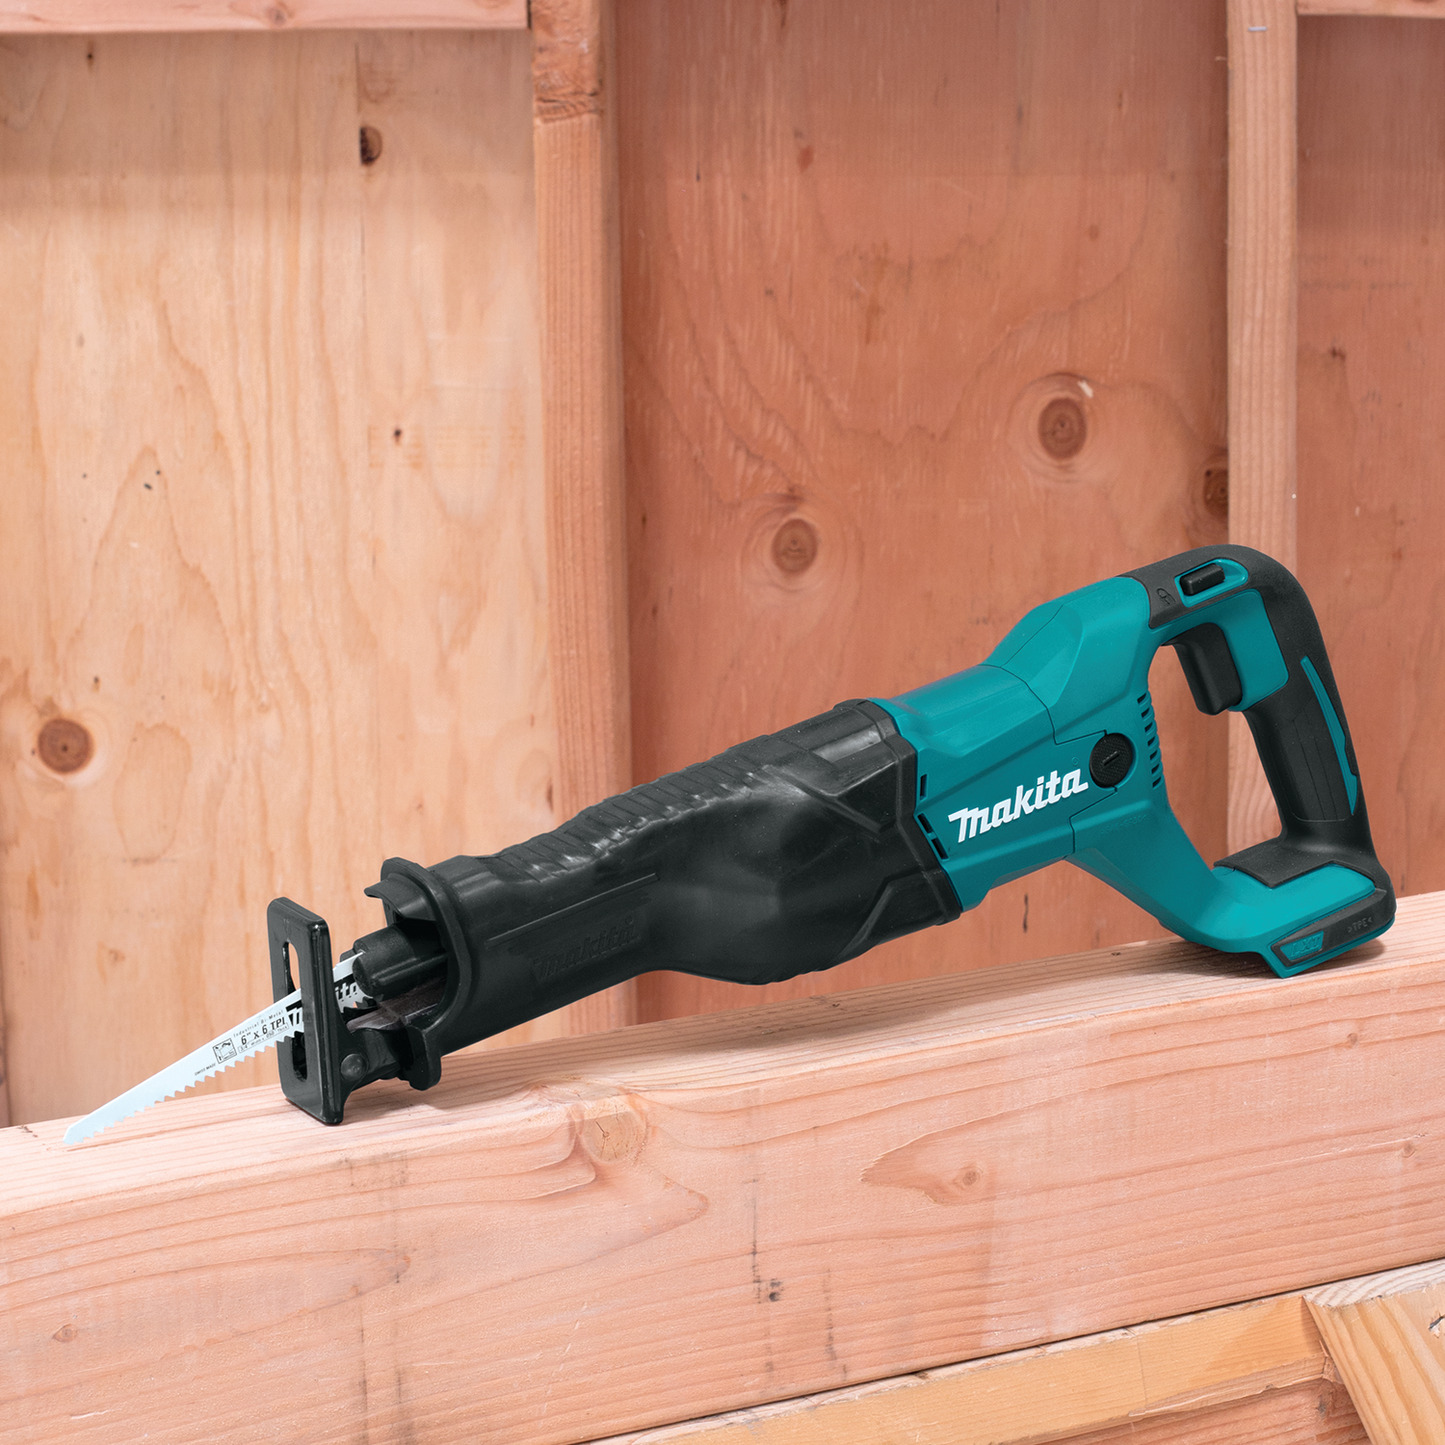 Makita 18 Volt LXT Lithium Ion Cordless Reciprocating Saw Factory Serviced (Tool Only)